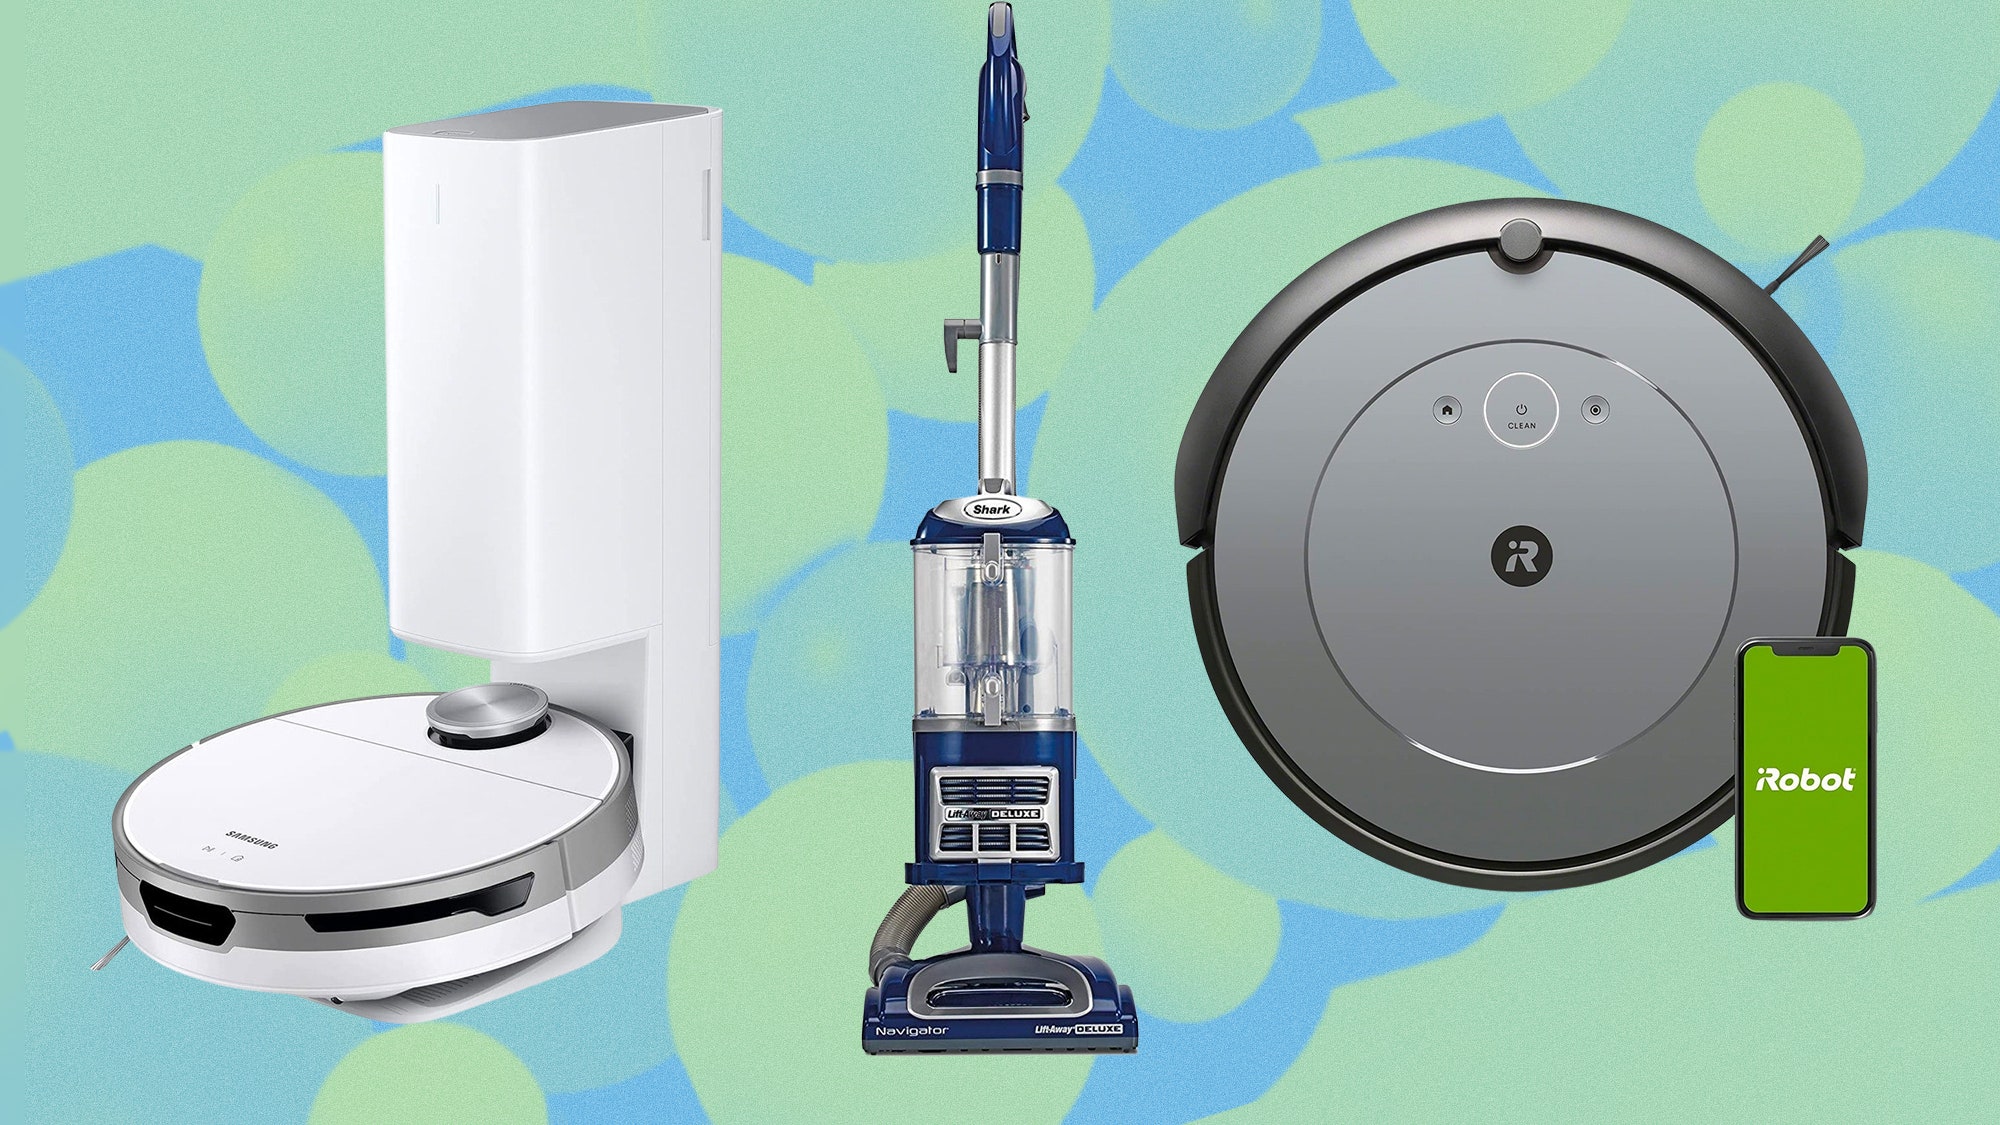 15-prime-day-deals-on-vacuum-cleaners-that-don’t-suck